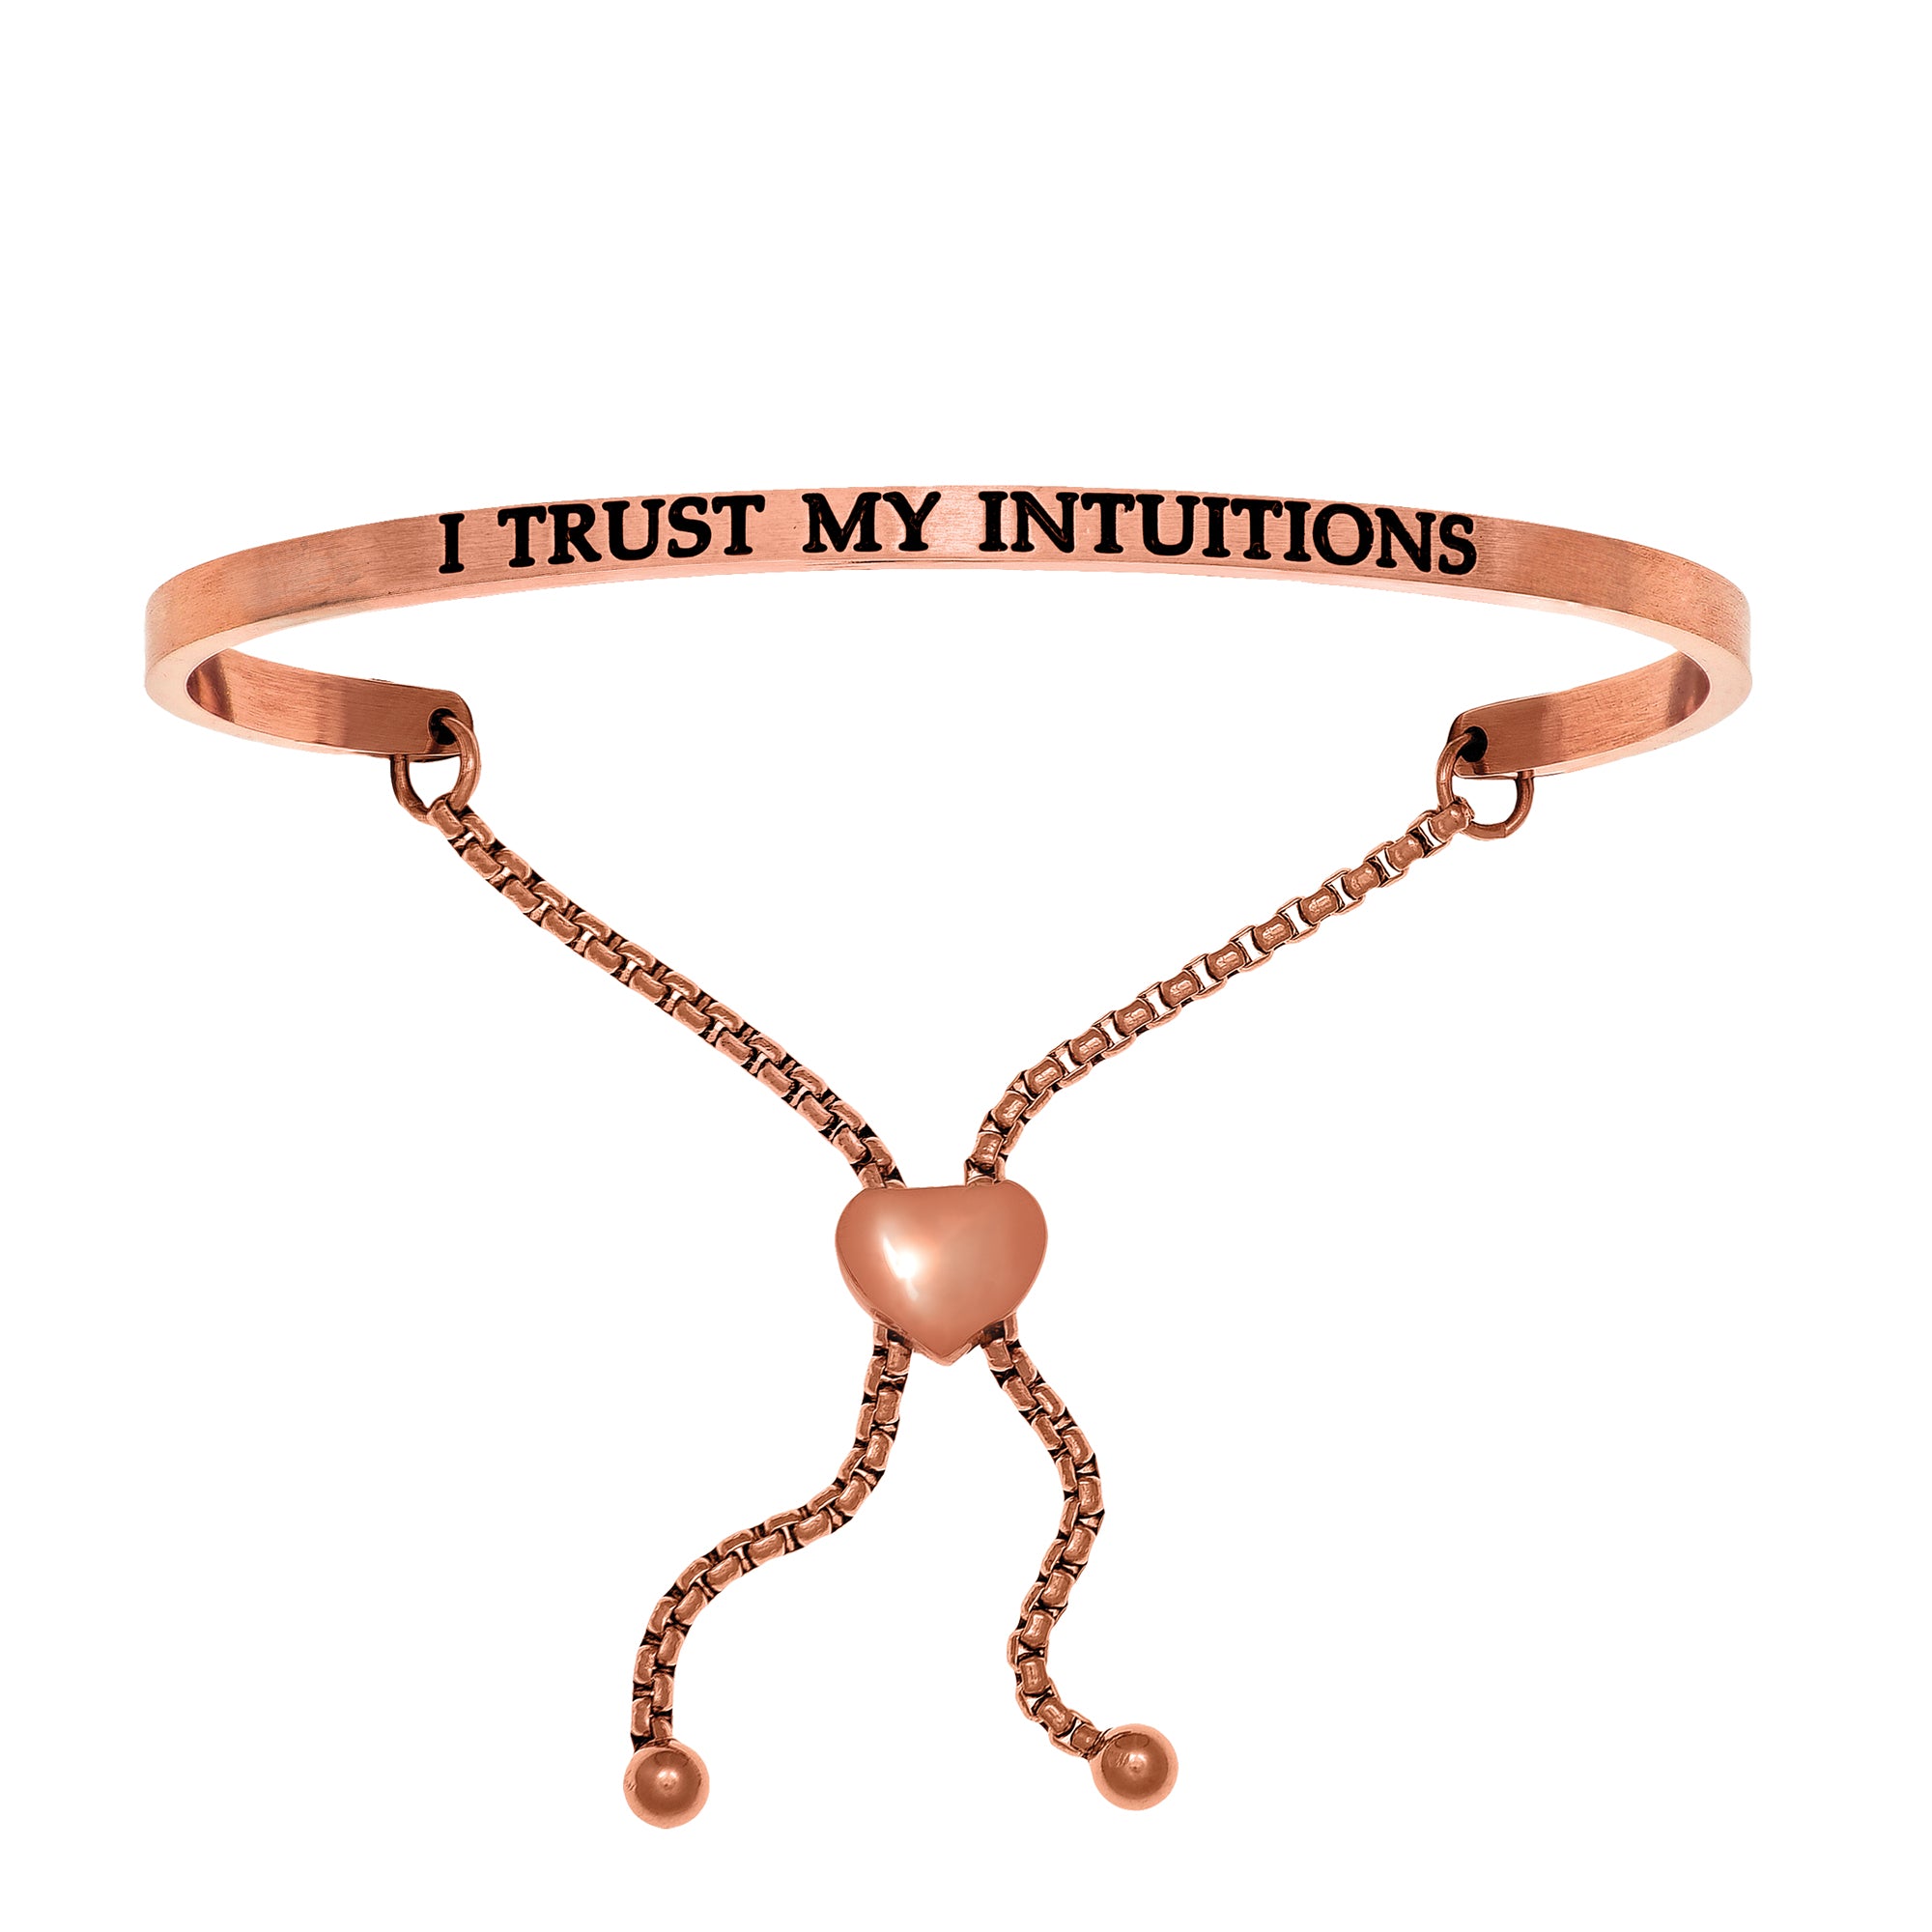 Intuitions Stainless Steel I TRUST MY S Diamond Accent Adjustable Bracelet